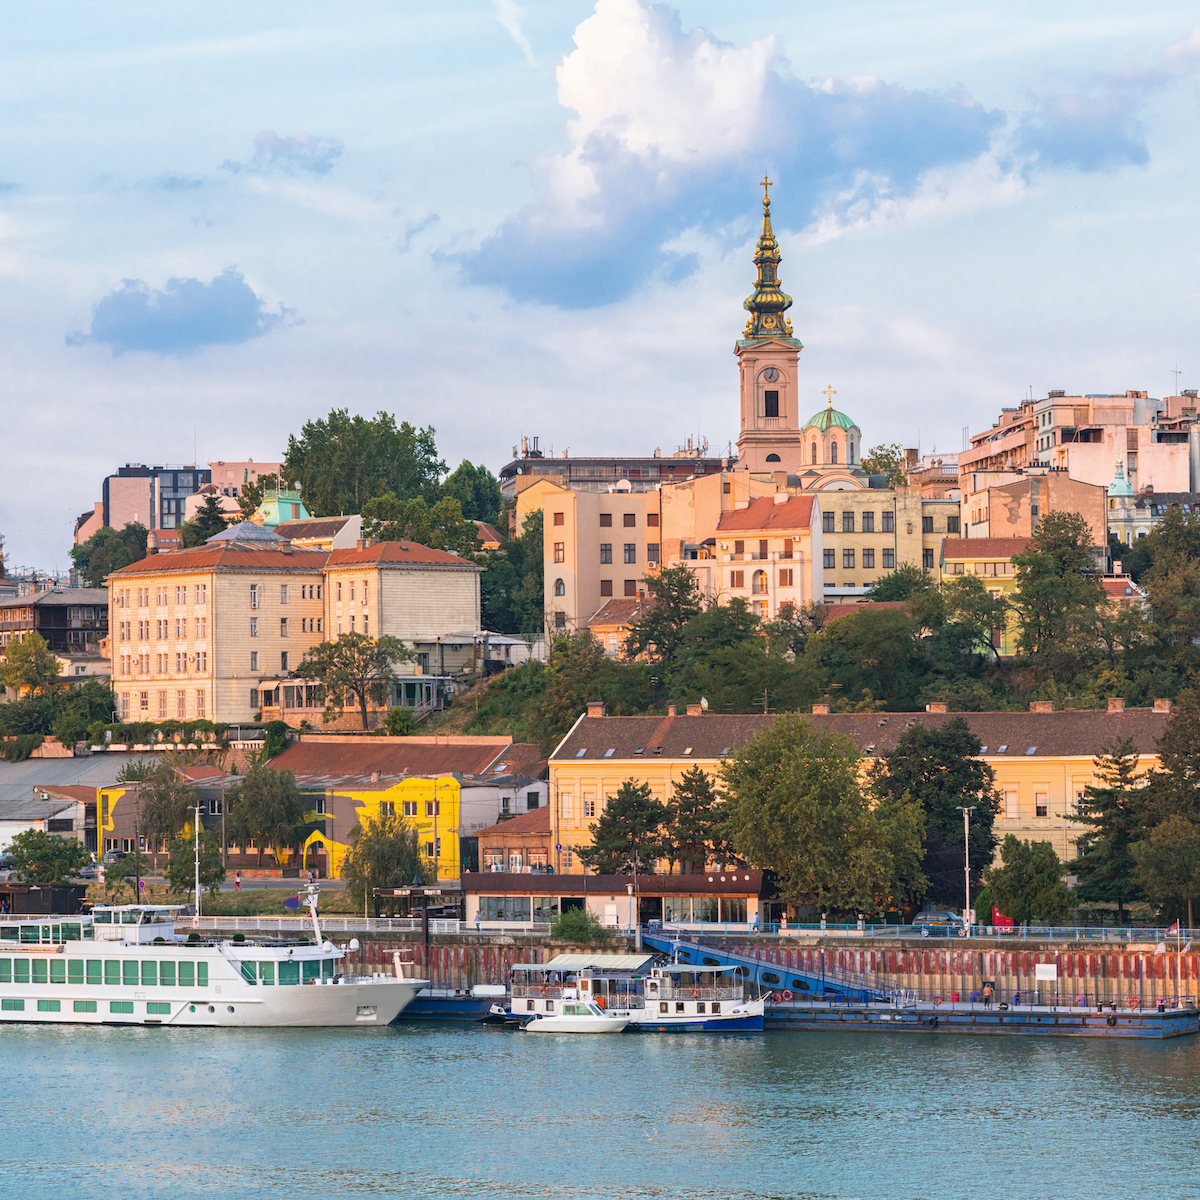 Belgrade on the banks of the Sava River in Serbia